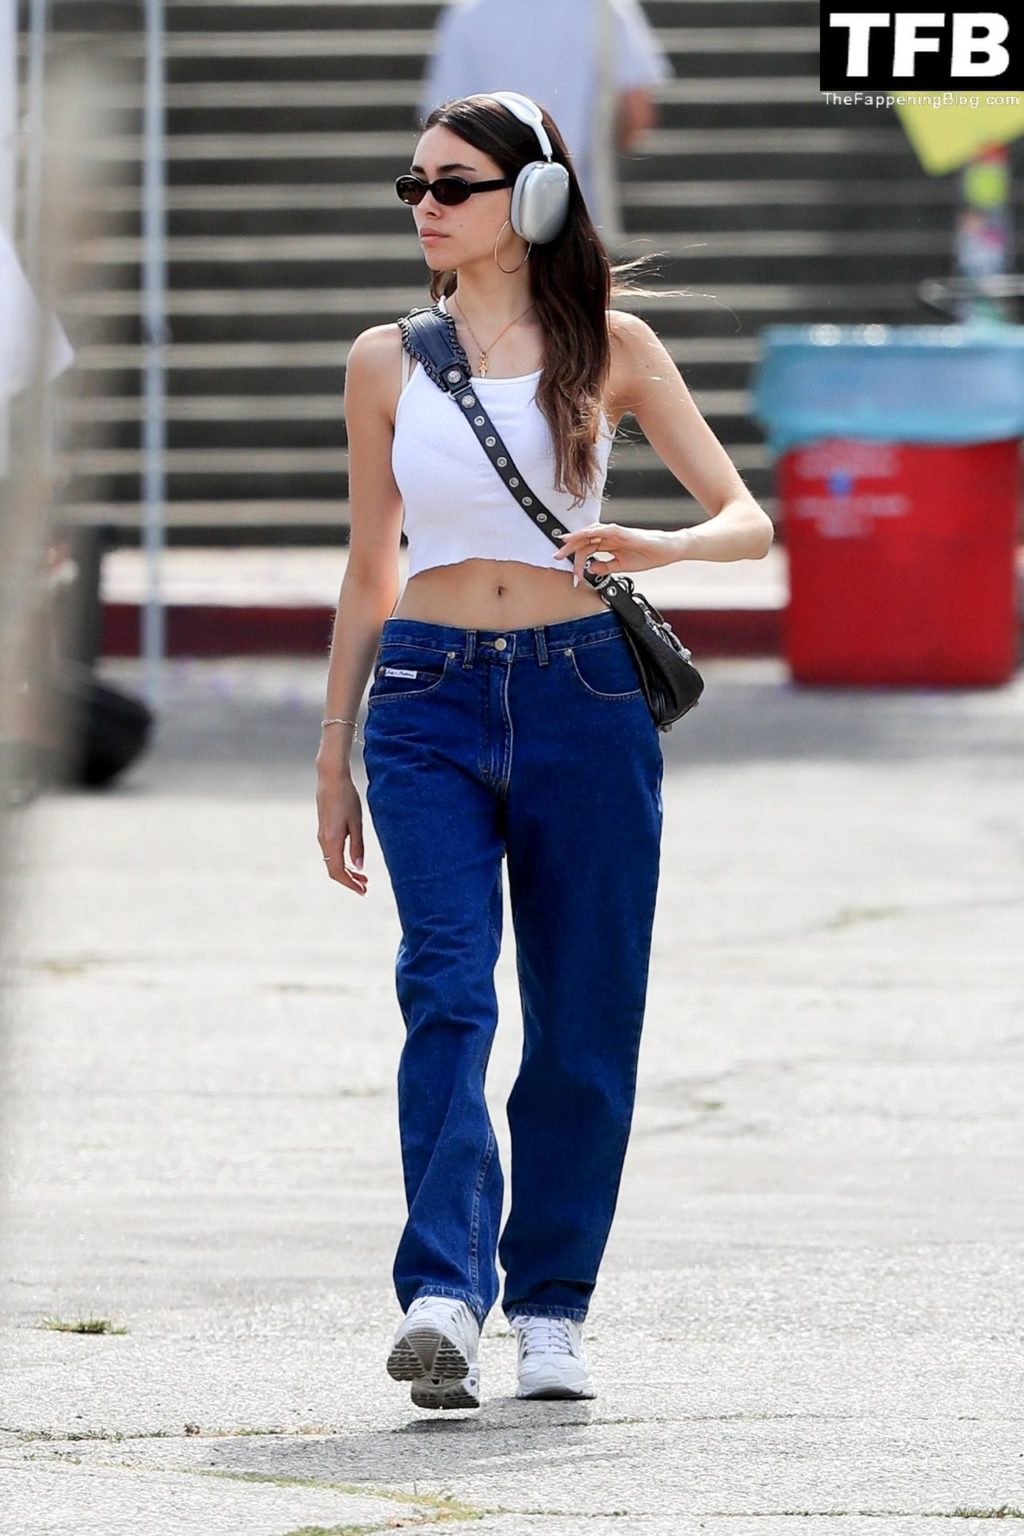 Madison Beer Sexy The Fappening Blog 28 1024x1536 - Madison Beer Wears a Tiny Crop Top Revealing a Toned Waist While Shopping in LA (39 Photos)